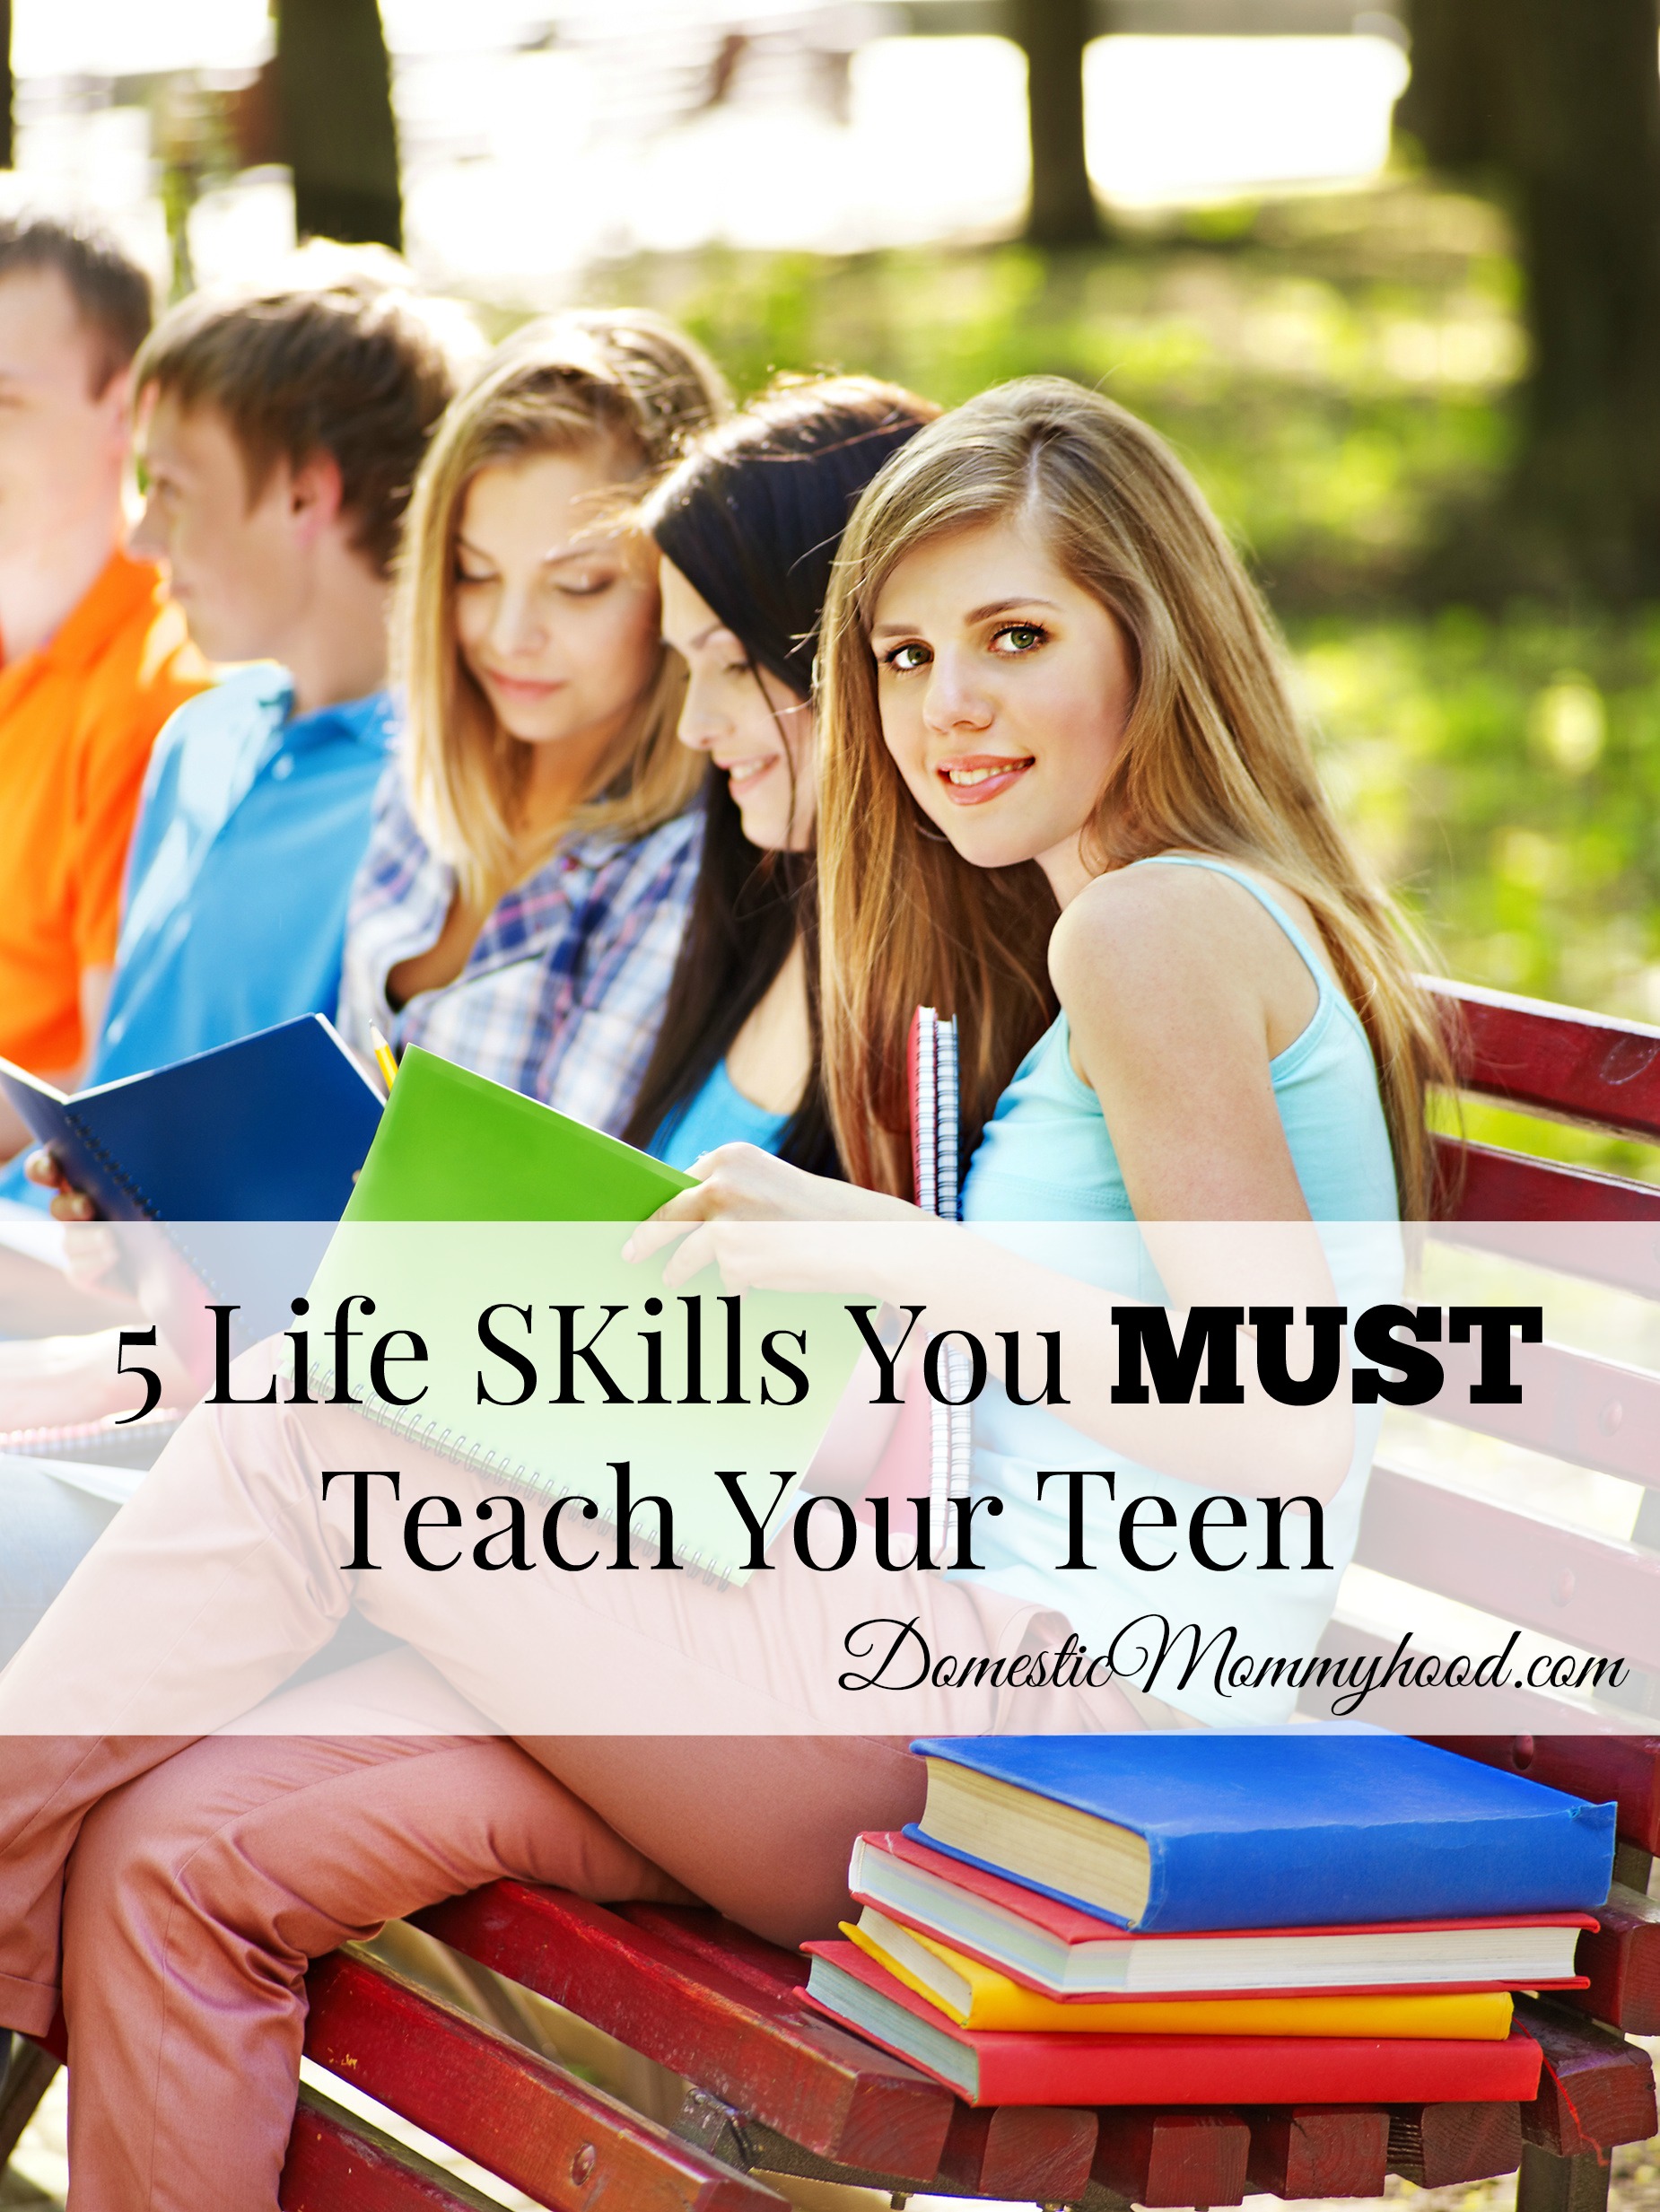 5 Life SKills You MUST Teach Your Teen